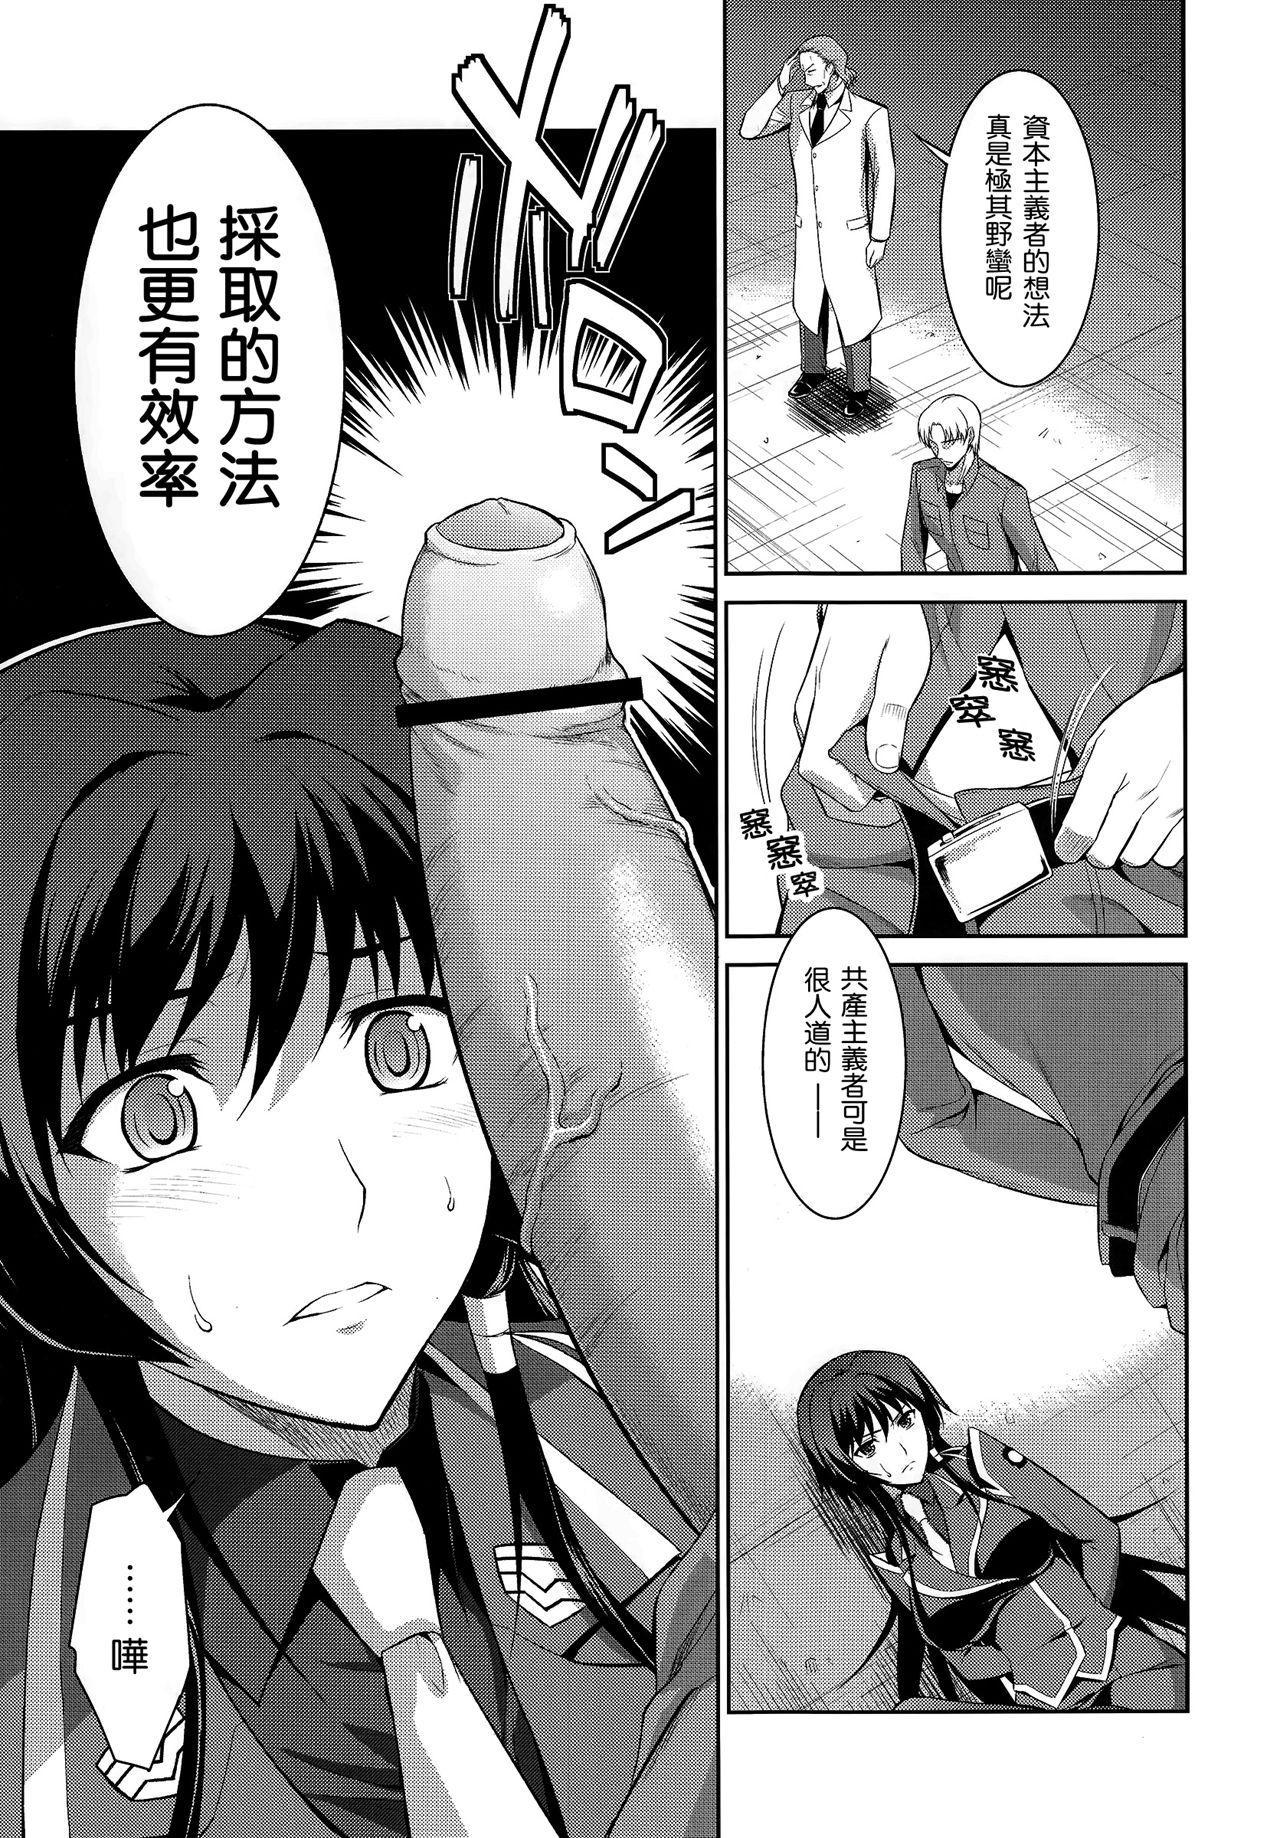 Yanks Featured Ouka Chiru! - Muv-luv alternative total eclipse Bedroom - Page 7